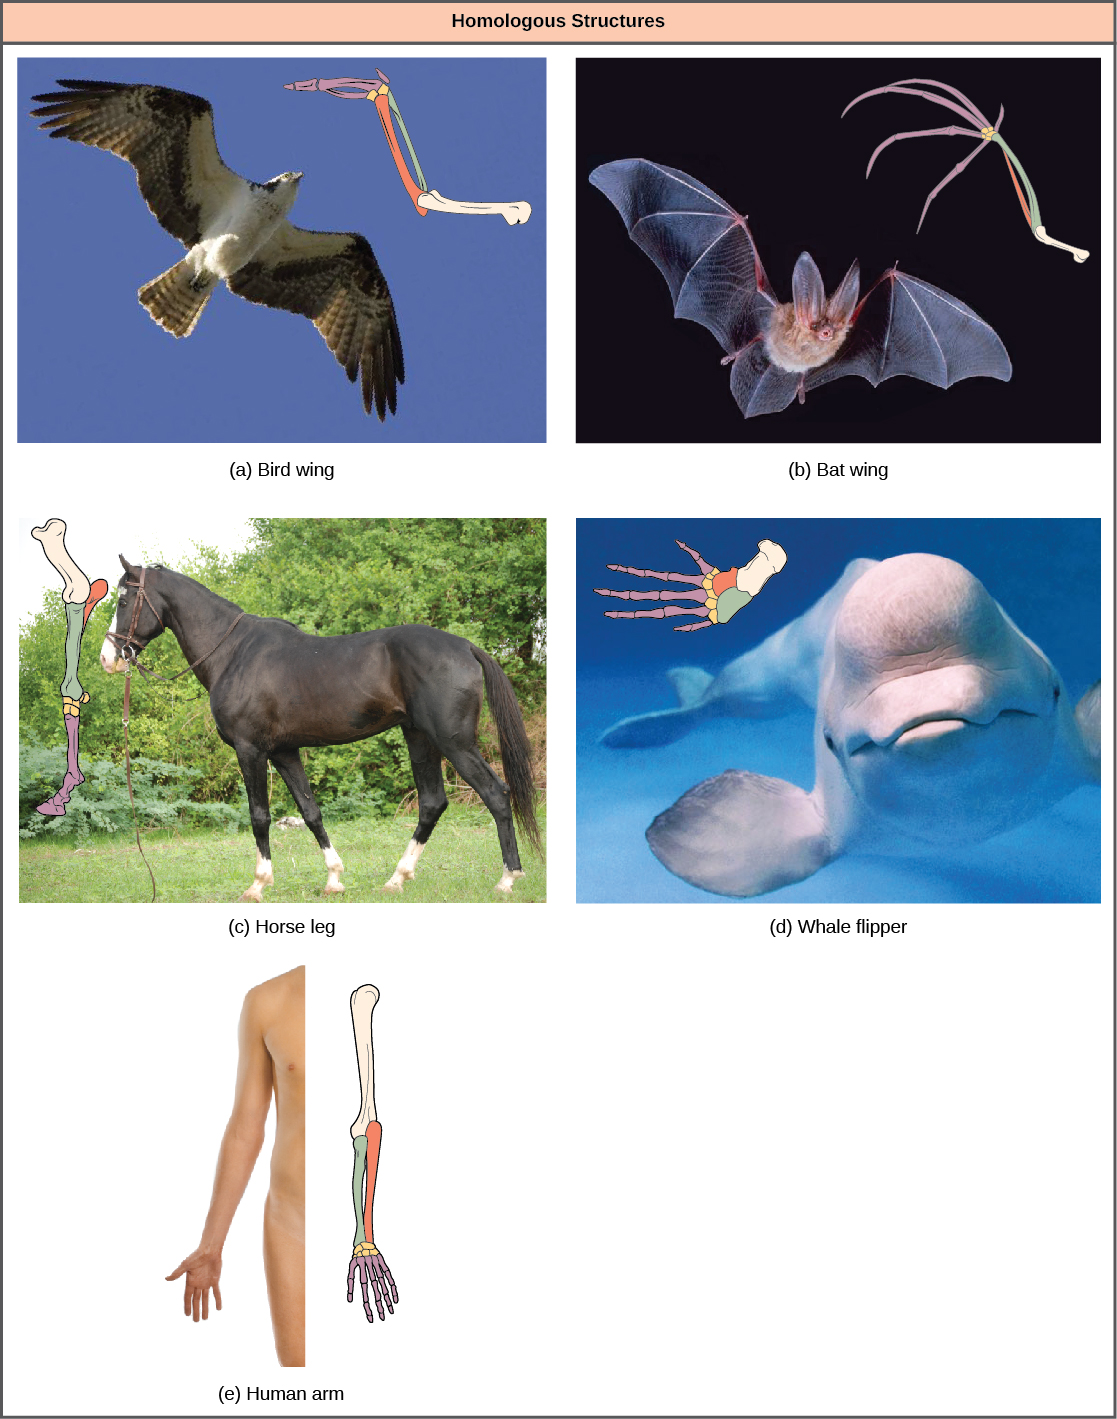 Photo A shows a bird in flight, with a corresponding drawing of bird wing bones. Photo B shows a bat in flight with a corresponding drawing of bat wing bones. Photo C shows a horse, with a corresponding drawing of front leg bones. Photo D shows a beluga whale, with a corresponding drawing of flipper bones. Photo E shows a human arm, with a corresponding drawing of arm bones. All the limbs share common bones, analogous to the bones in the arms and fingers of humans. However, in the bat wing, finger bones are long and separate and form a scaffolding on which the wing's membrane is stretched. In the bird wing, the finger bones are fused together. In the horse leg, the ulna is shortened and is fused to the radius. The hand bones are reduced to one long thick bone and the finger bones are reduced to one long thick finger with a modified nail or hoof. In the whale flipper, the humerus, ulna, and radius are very short and thick.